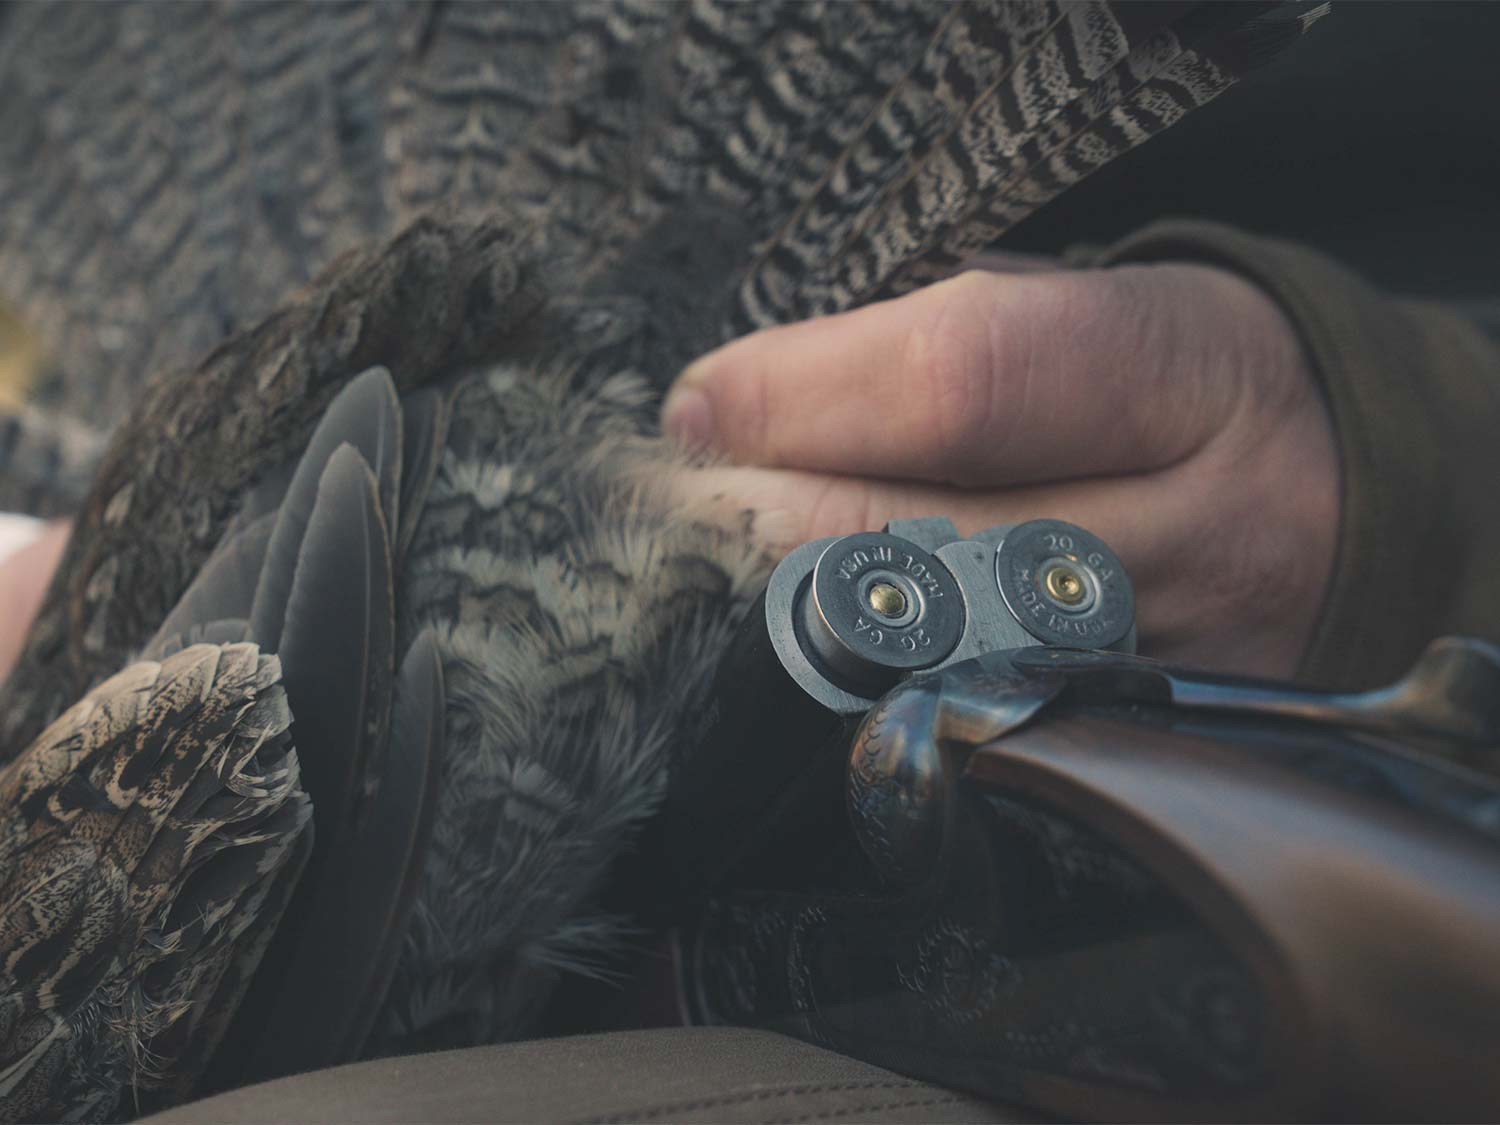 A hunter checks shotshells in a side-by-side shotgun next to a grouse.